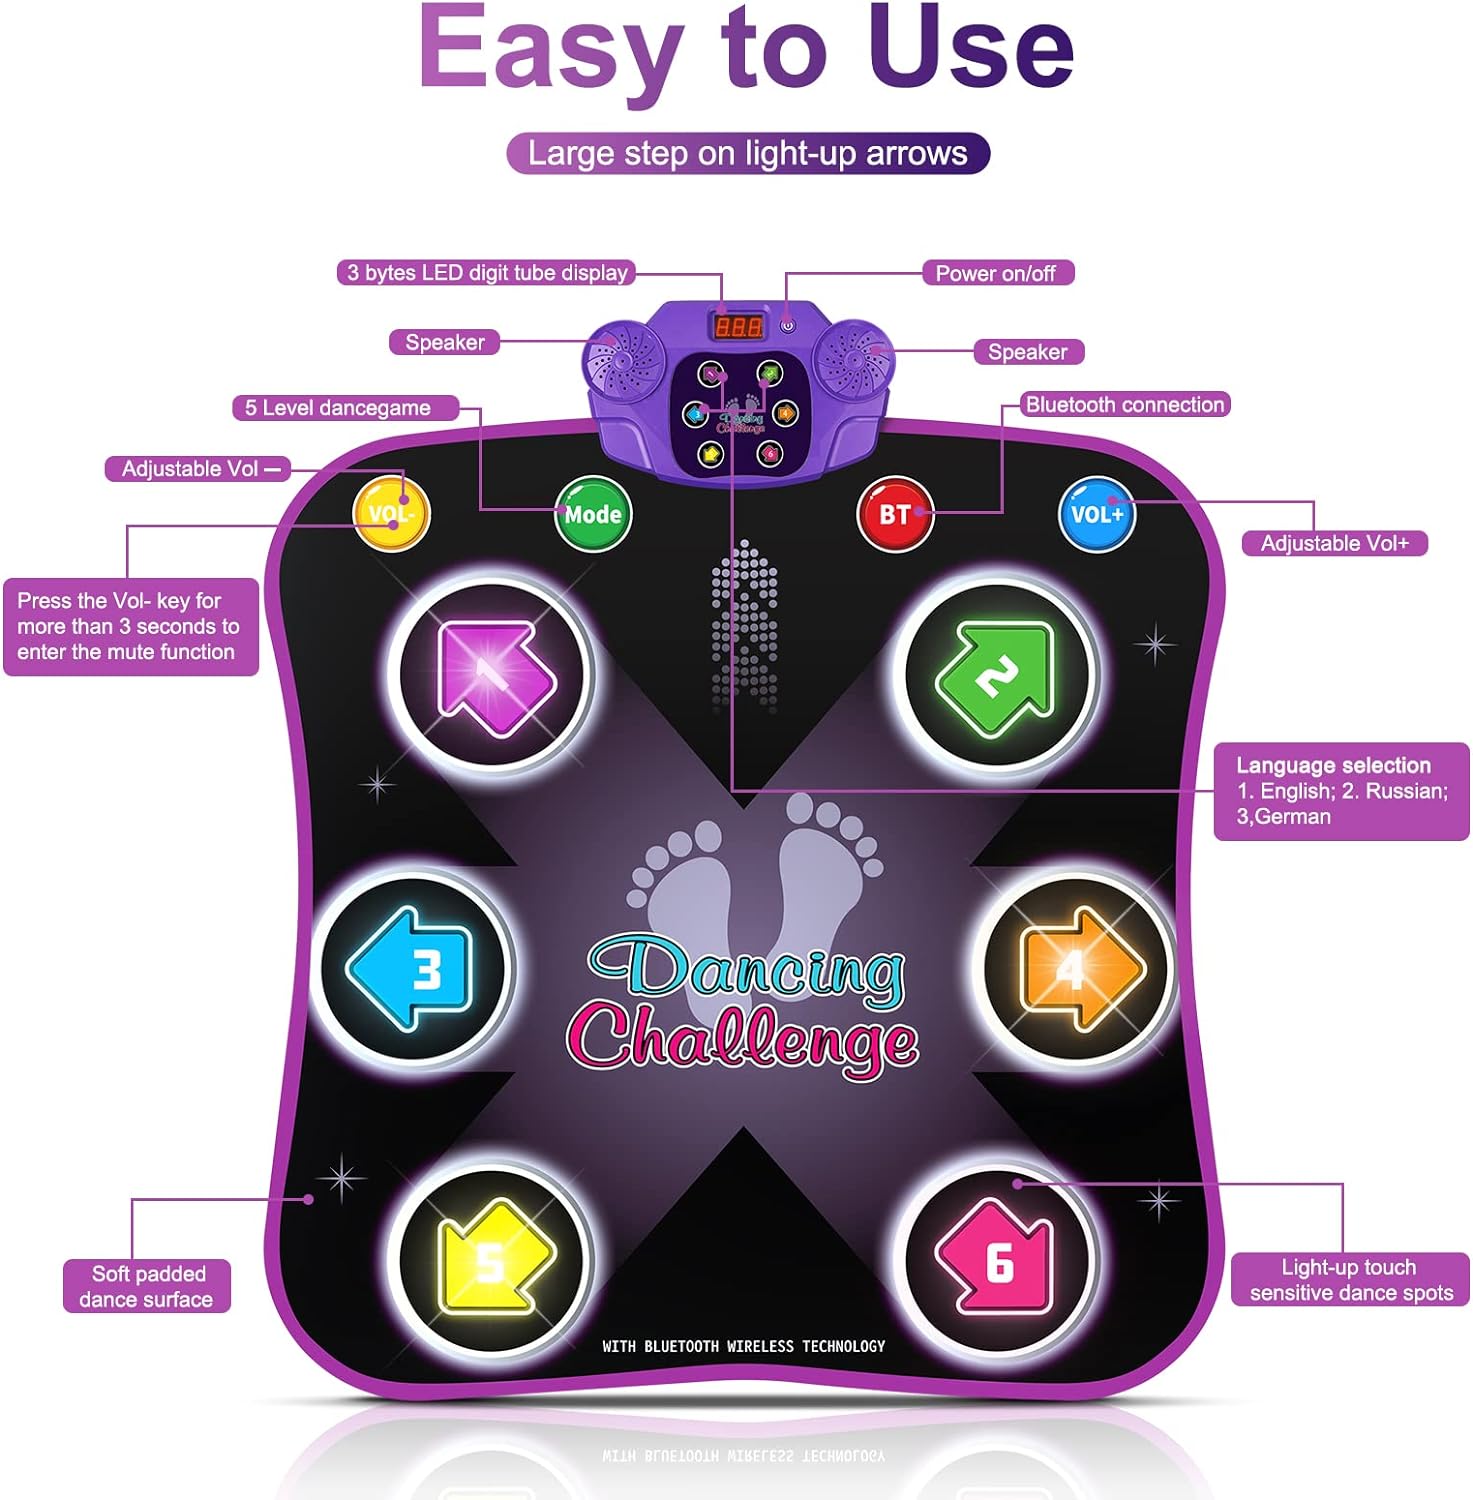 Flooyes Dance Mat Toys for 3-12 Year Old Kids, Electronic Dance Pad with Light-up 6-Button  Wireless Bluetooth, Music Dance Game Mat with 5 Game Modes, Gifts for 3 4 5 6 7 8 9 10+ Year Old Girls : Toys  Games